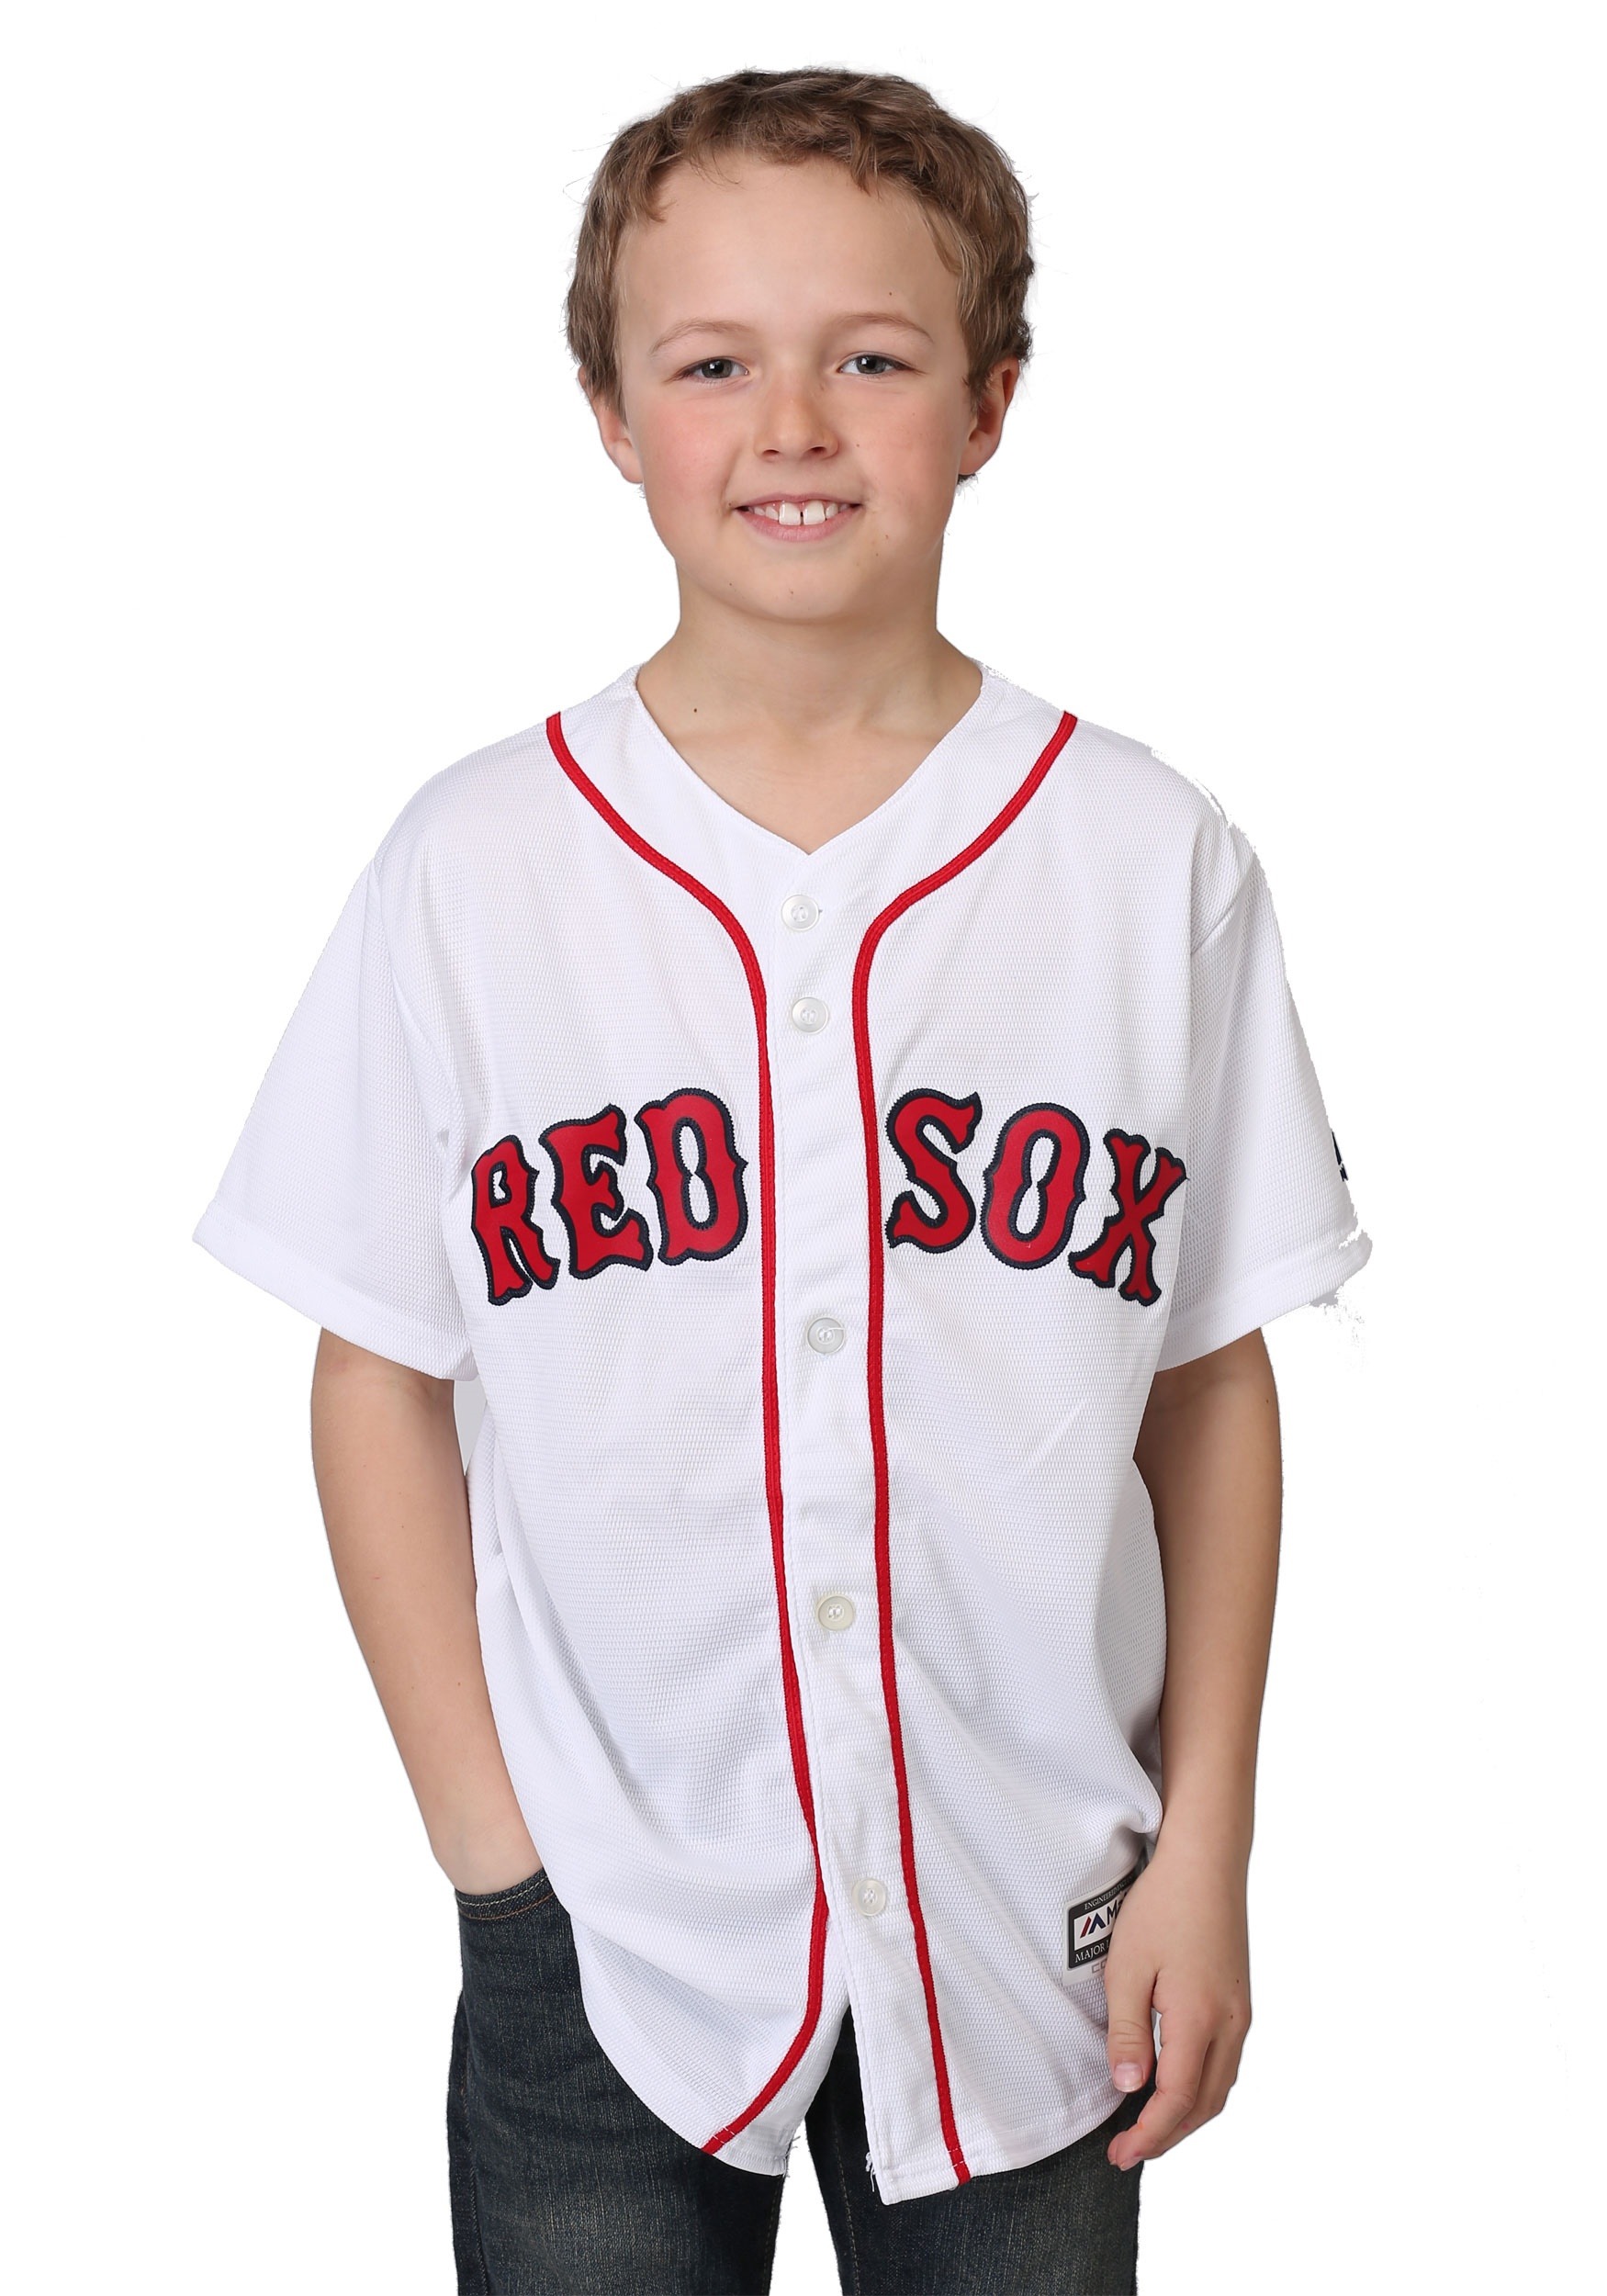 Details about   Kids Majestic Boston Red Sox Therma Base Sweatshirt shirt jersey Size Med NWOT 